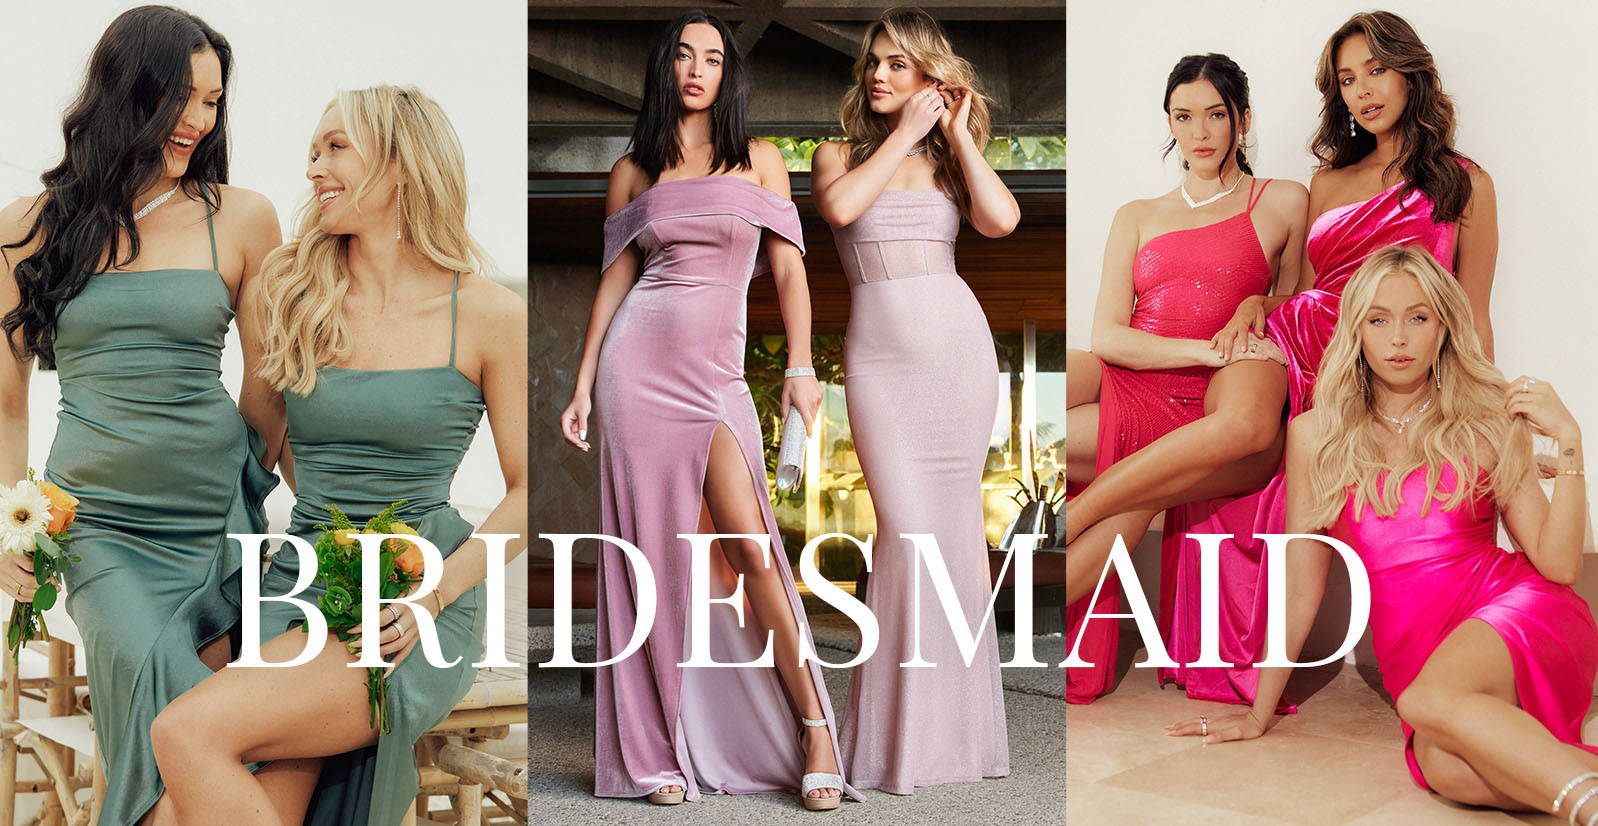 Capture bridesmaid dresses that fit your wedding theme with a variety of colors, figure-flattering styles, and lightweight, stretchy, or breathable fabrics that you can mix and match to find the perfect bridesmaid dresses for an elevated bridal party look!